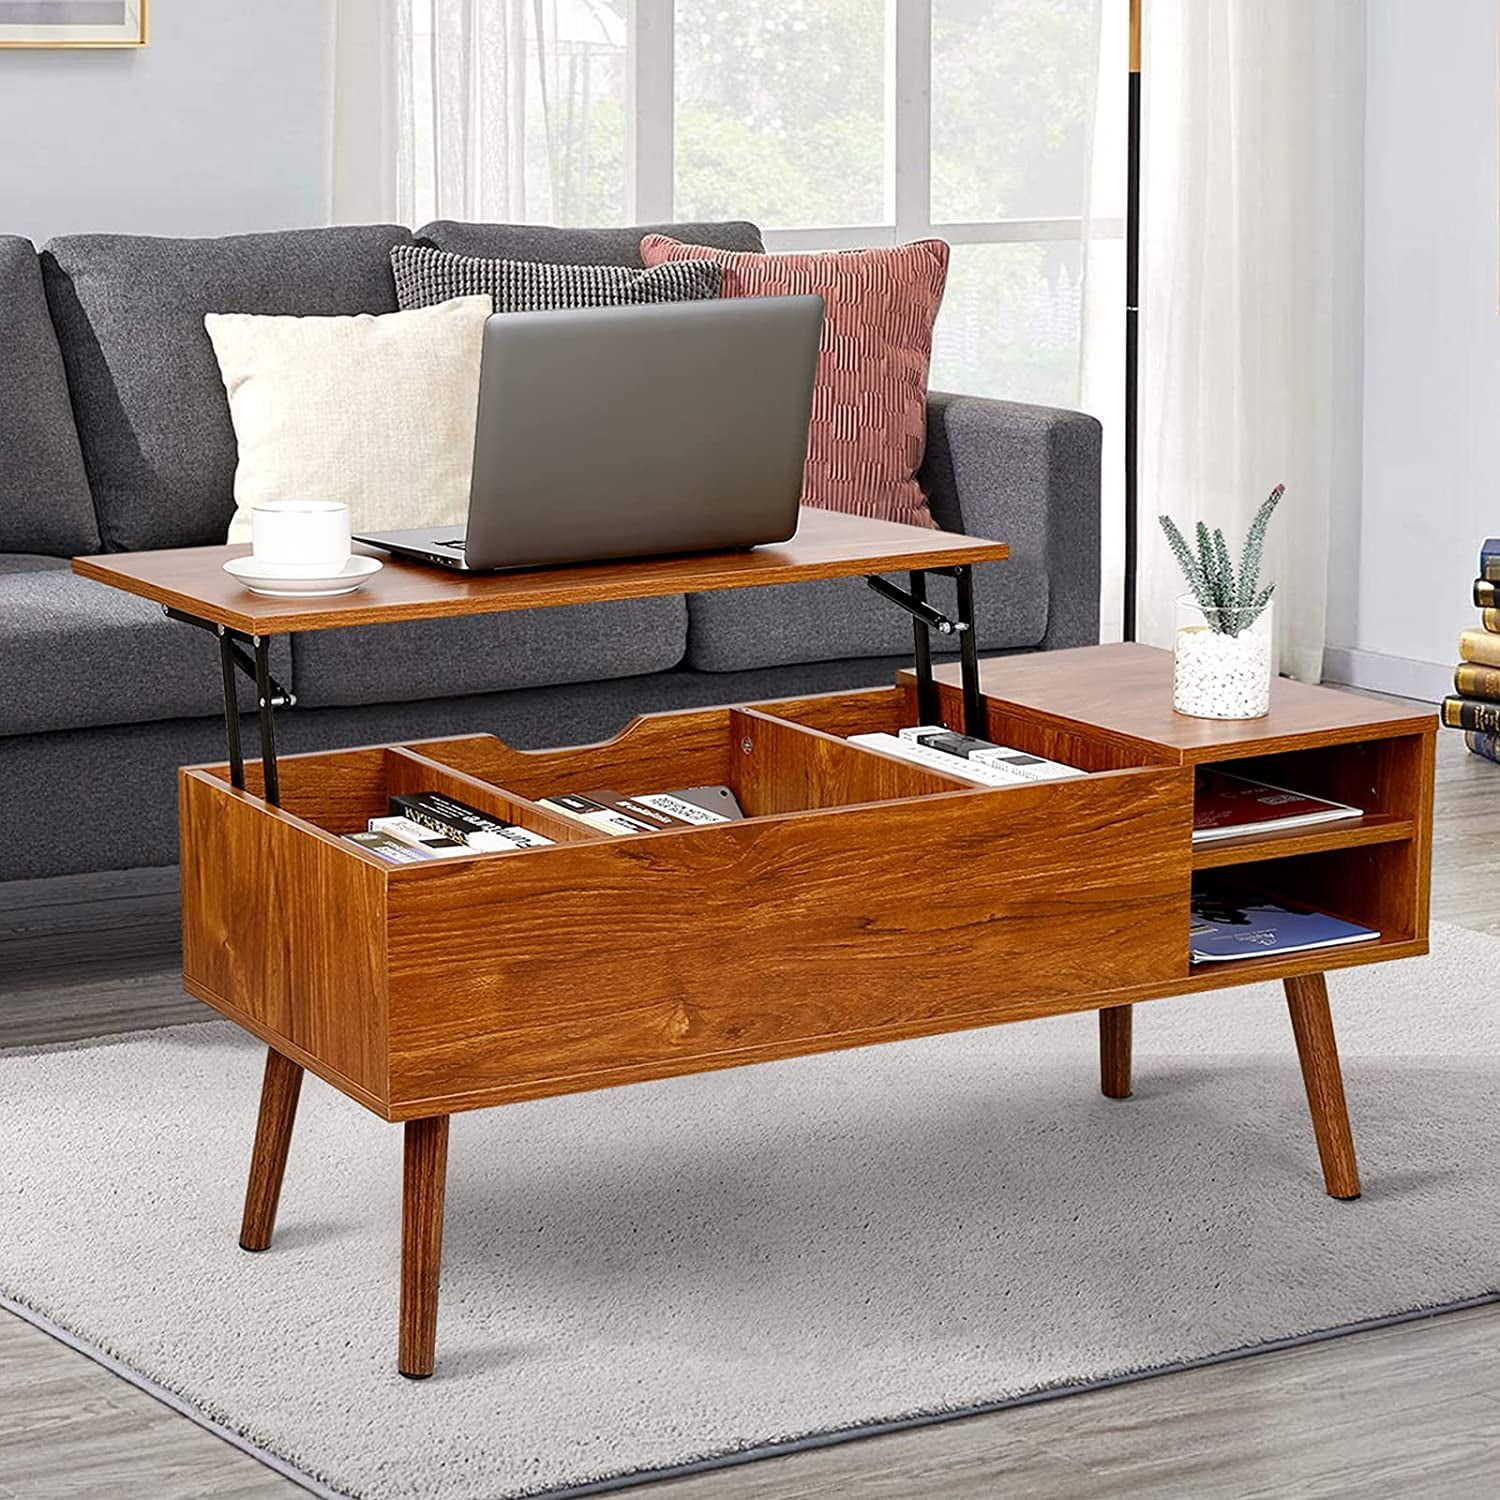 Modern Lift Top Coffee Table With Hidden Compartment Storage,adjustable Pertaining To Lift Top Coffee Tables With Hidden Storage Compartments (Photo 2 of 15)